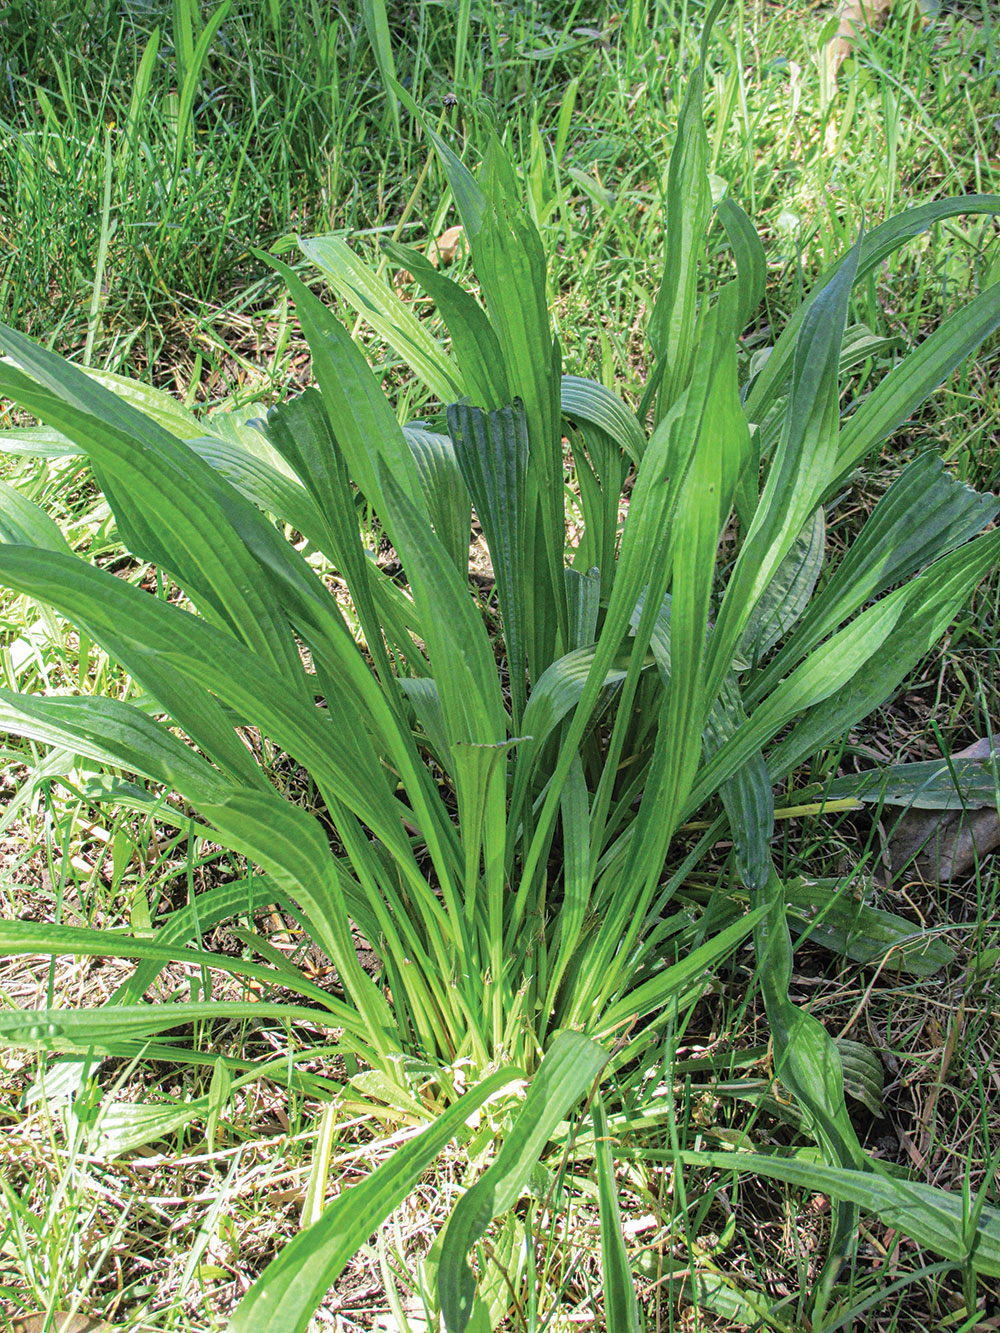 The young leaves of narrowleaf plantain